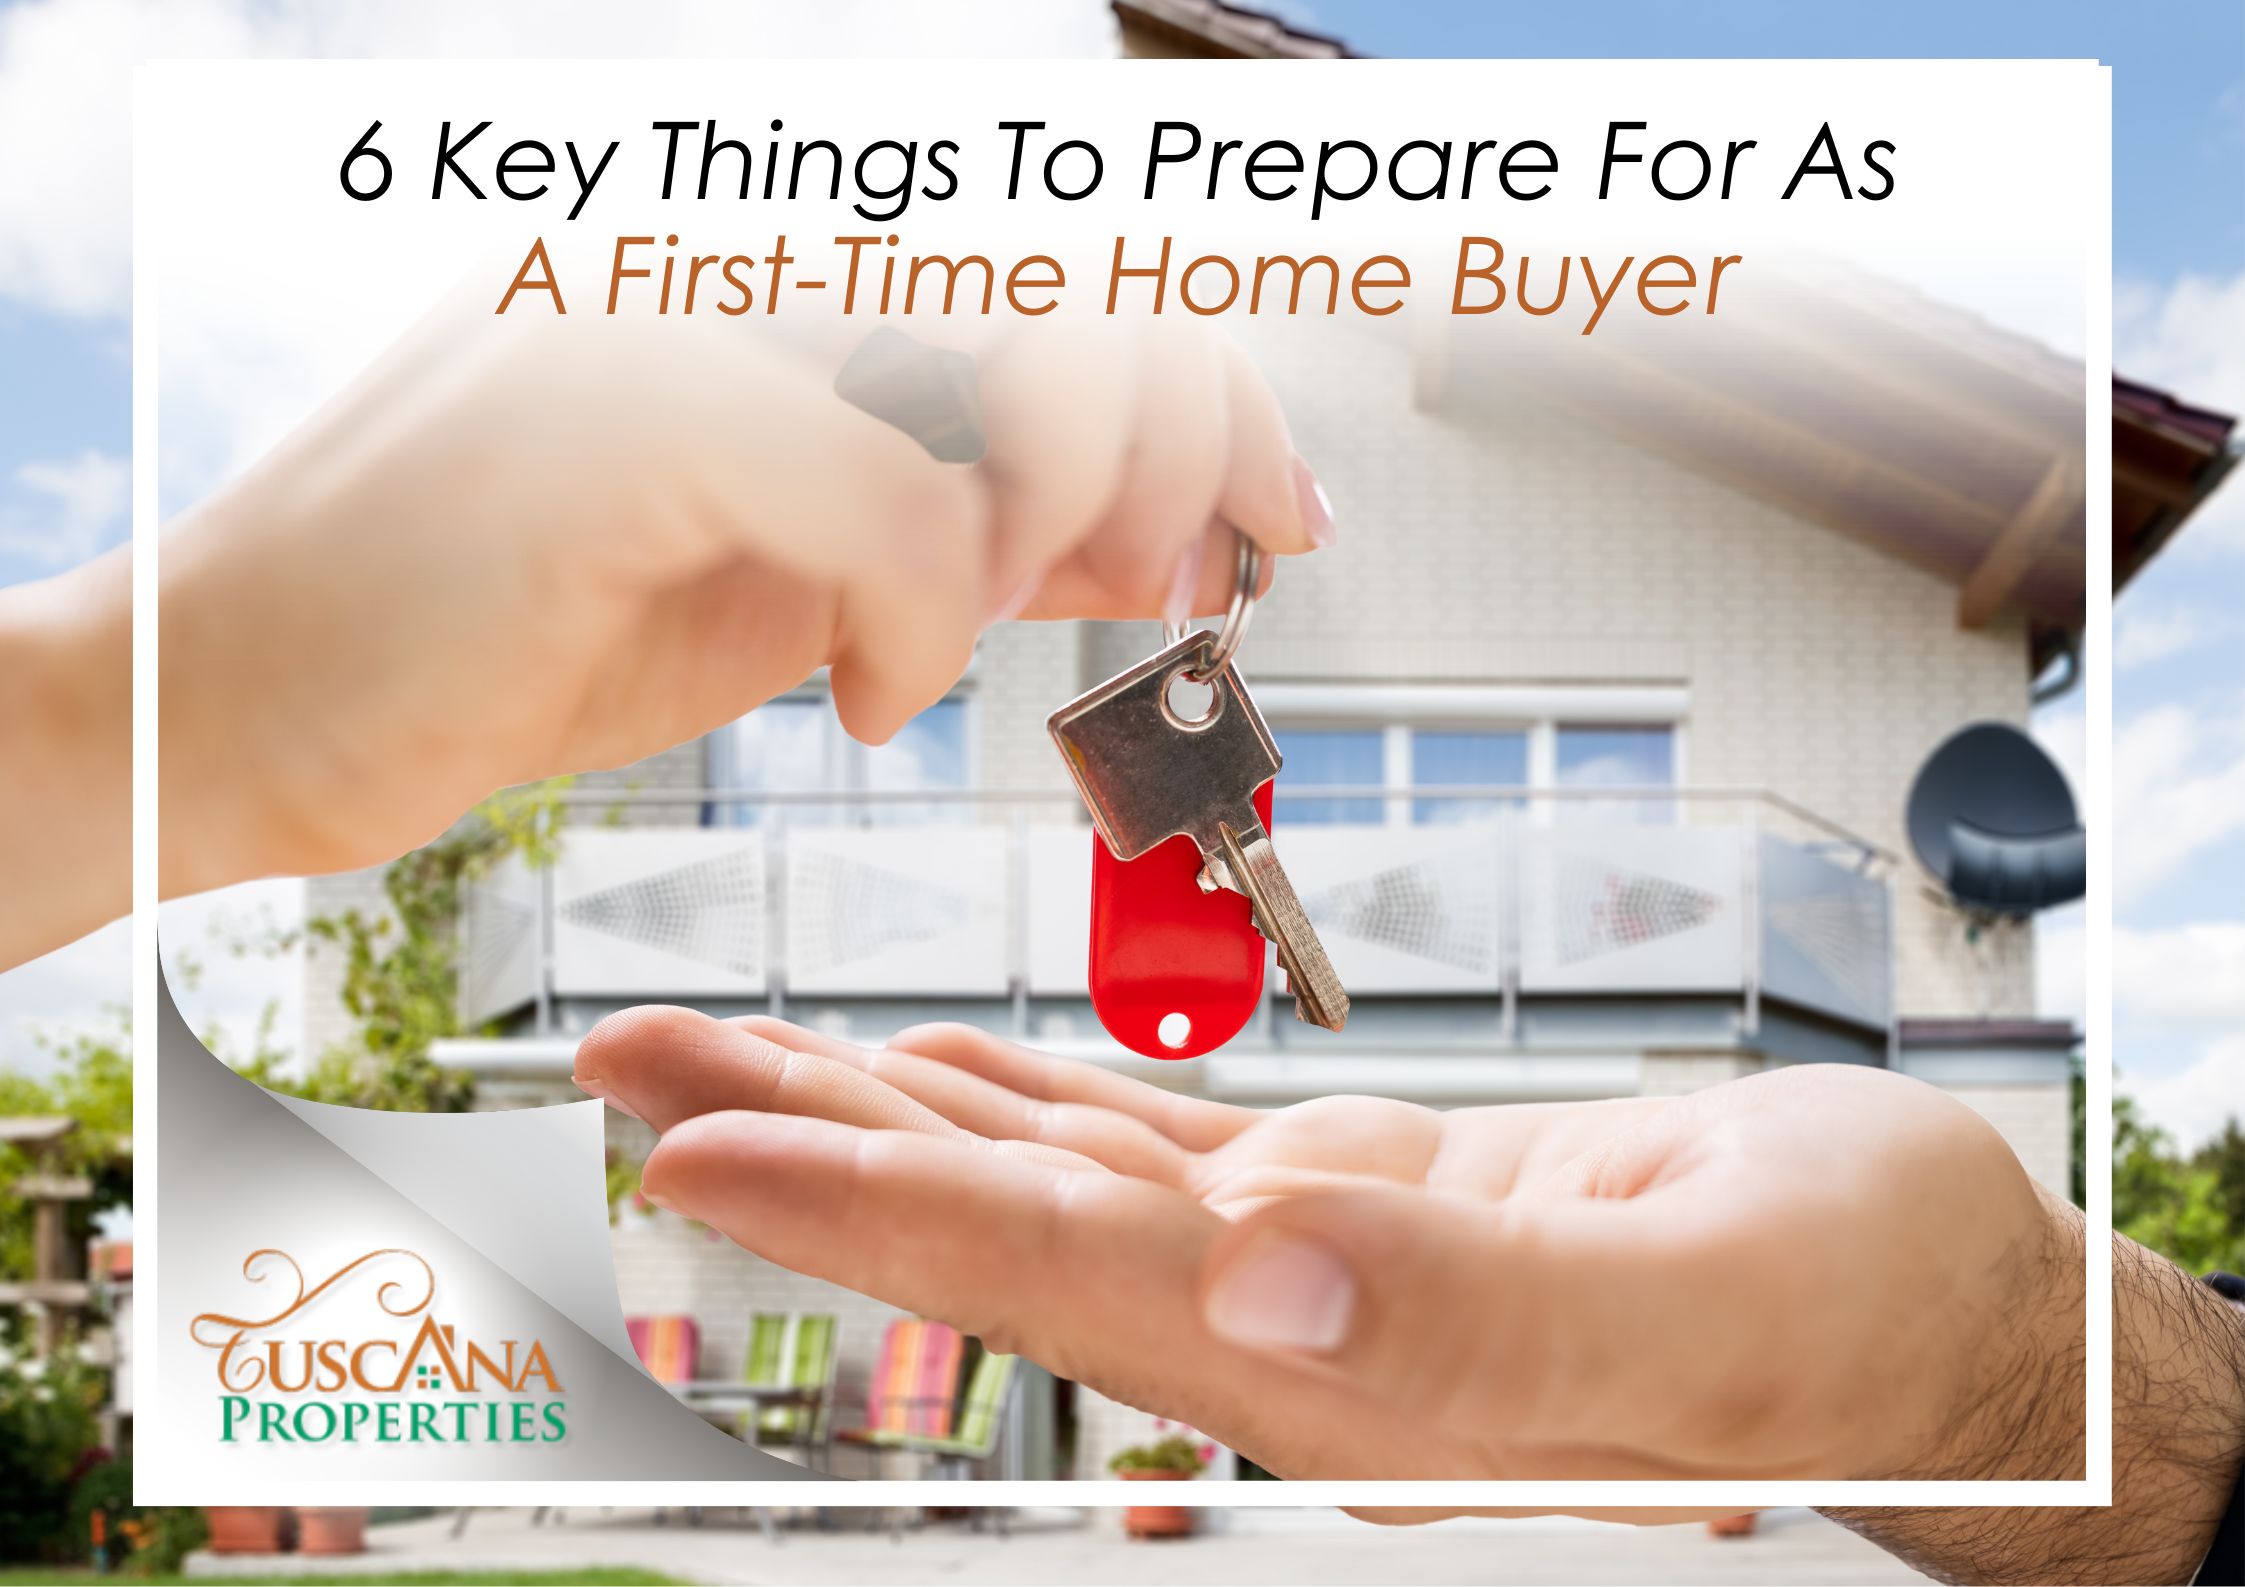 6 Key things to prepare for as a First-time homebuyer